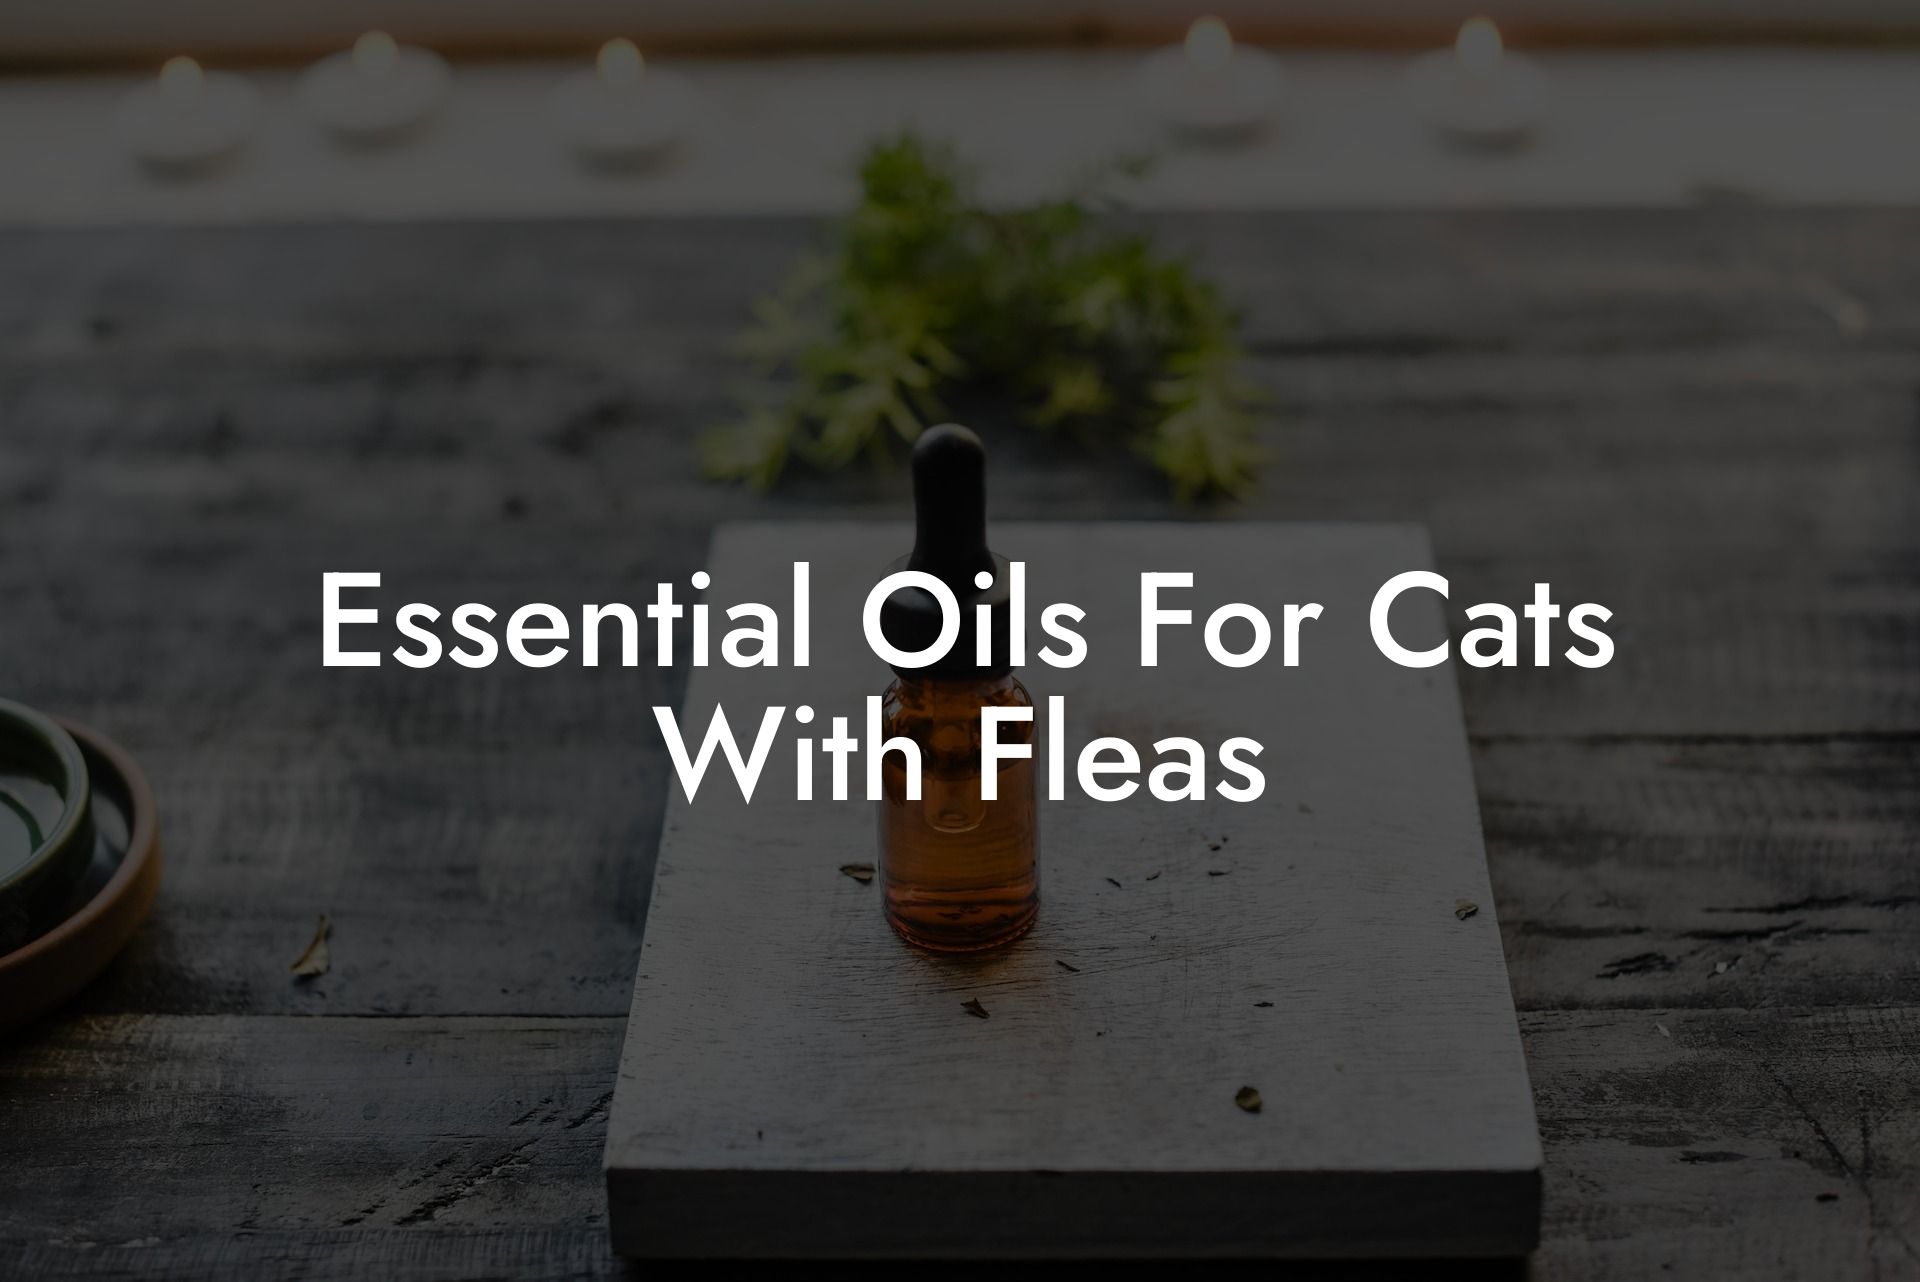 Essential Oils For Cats With Fleas